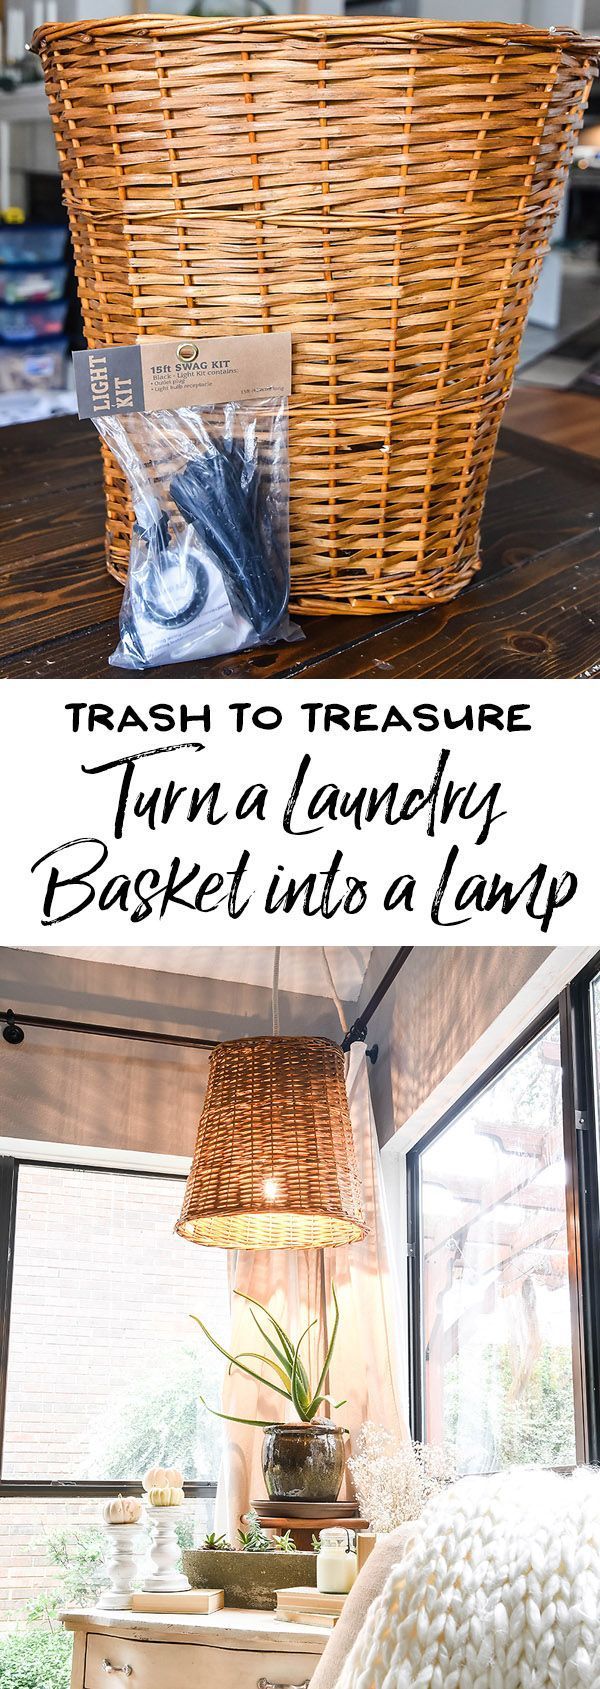 How to Turn a Laundry Basket into a Hanging Lamp - Our Handcrafted Life - How to Turn a Laundry Basket into a Hanging Lamp - Our Handcrafted Life -   18 diy Lamp boho ideas